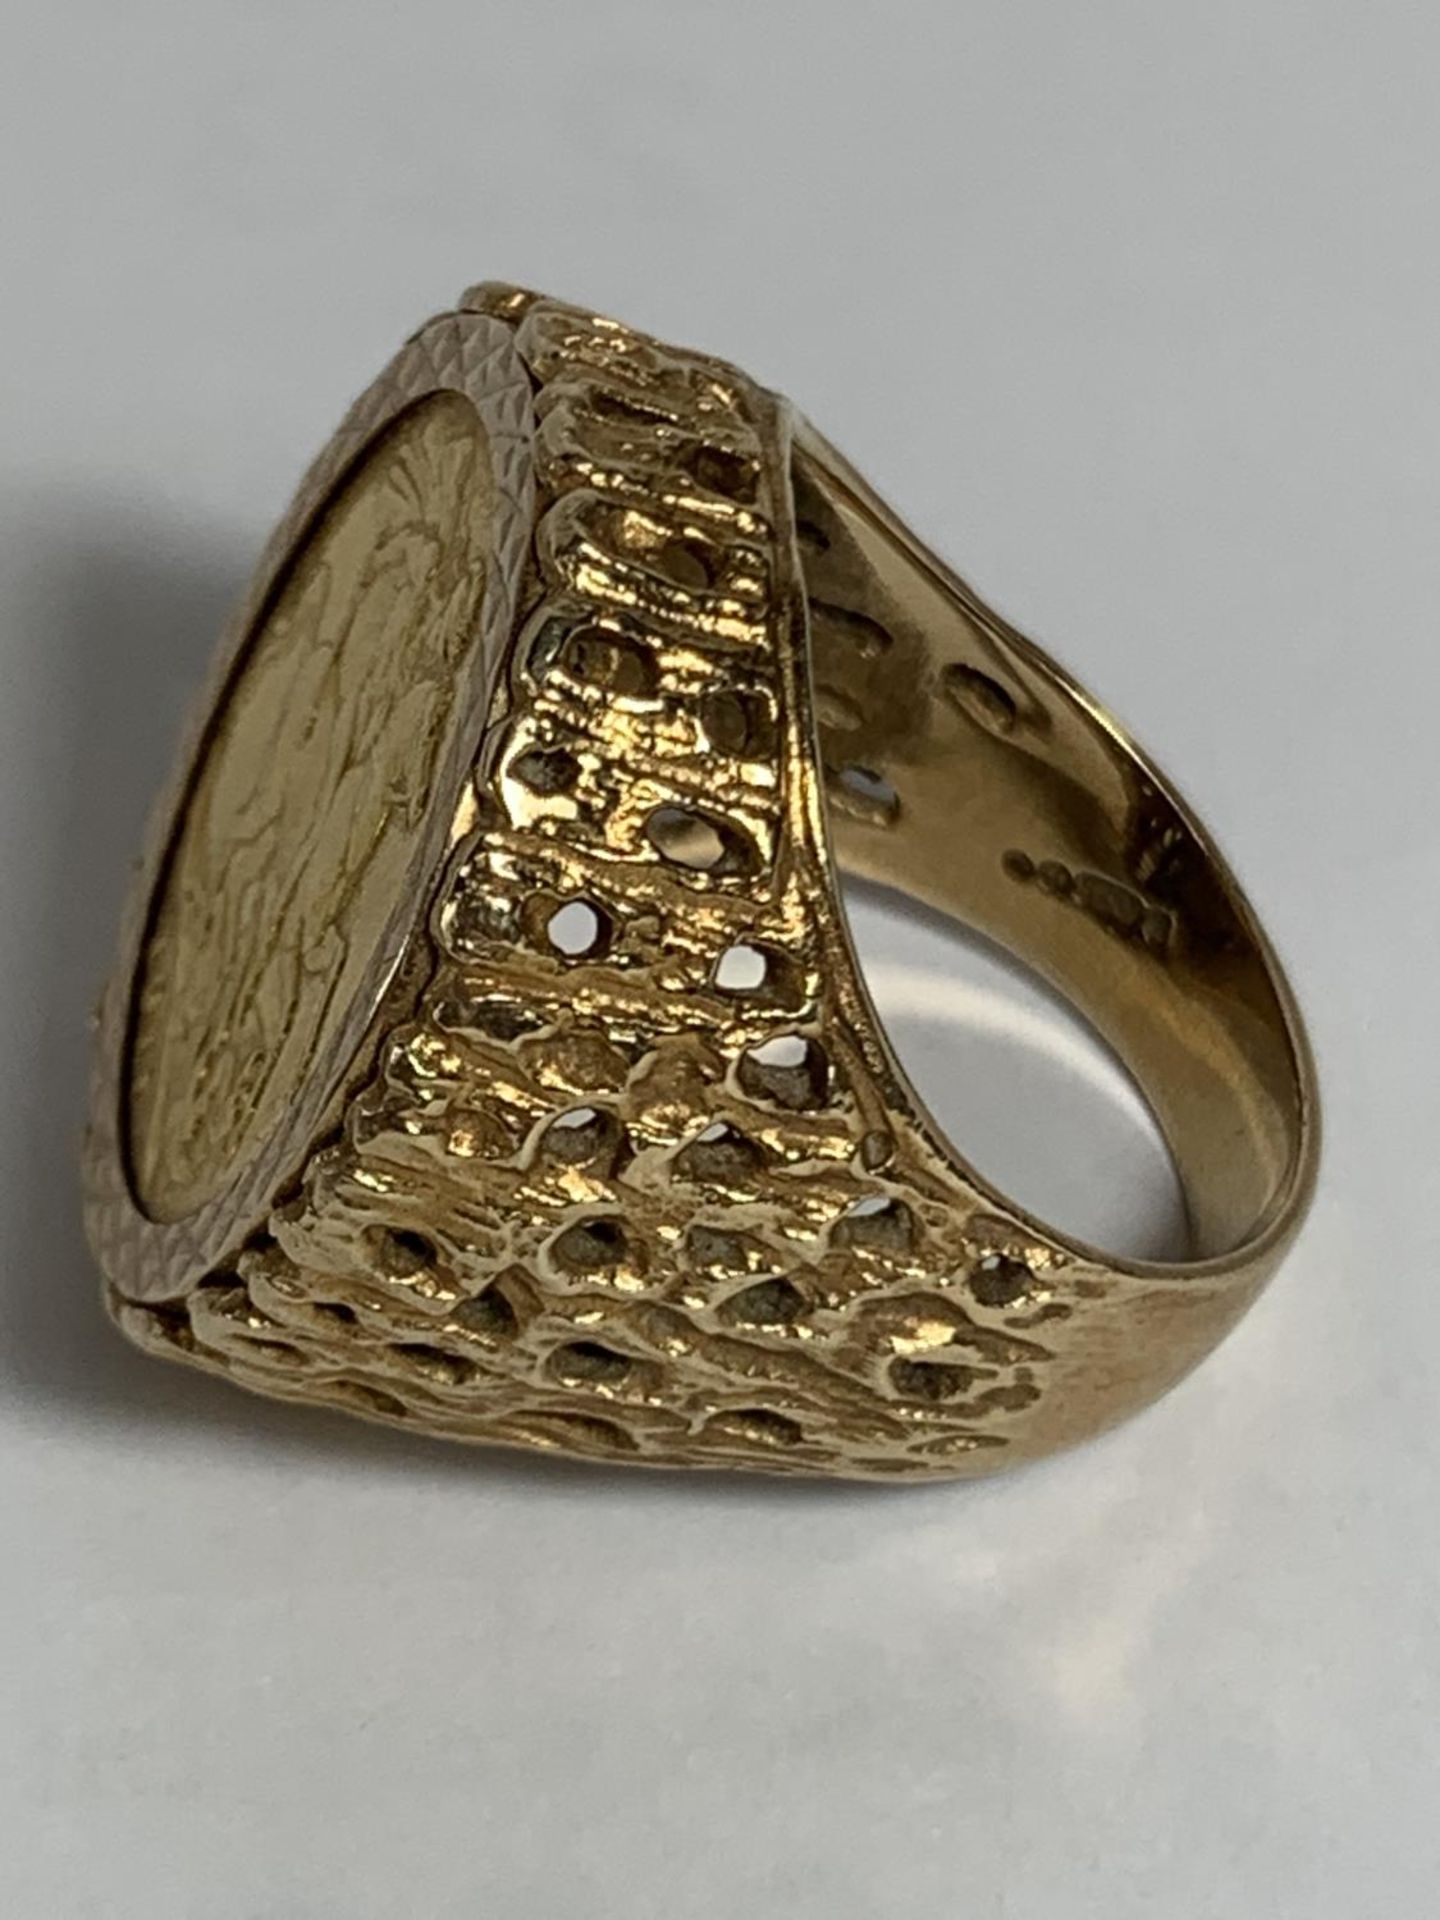 A 9 CARAT GOLD RING WITH A GEORGE V 1911 FULL SOVERIEGN GROSS WEIGHT 18.94 GRAMS - Image 2 of 3